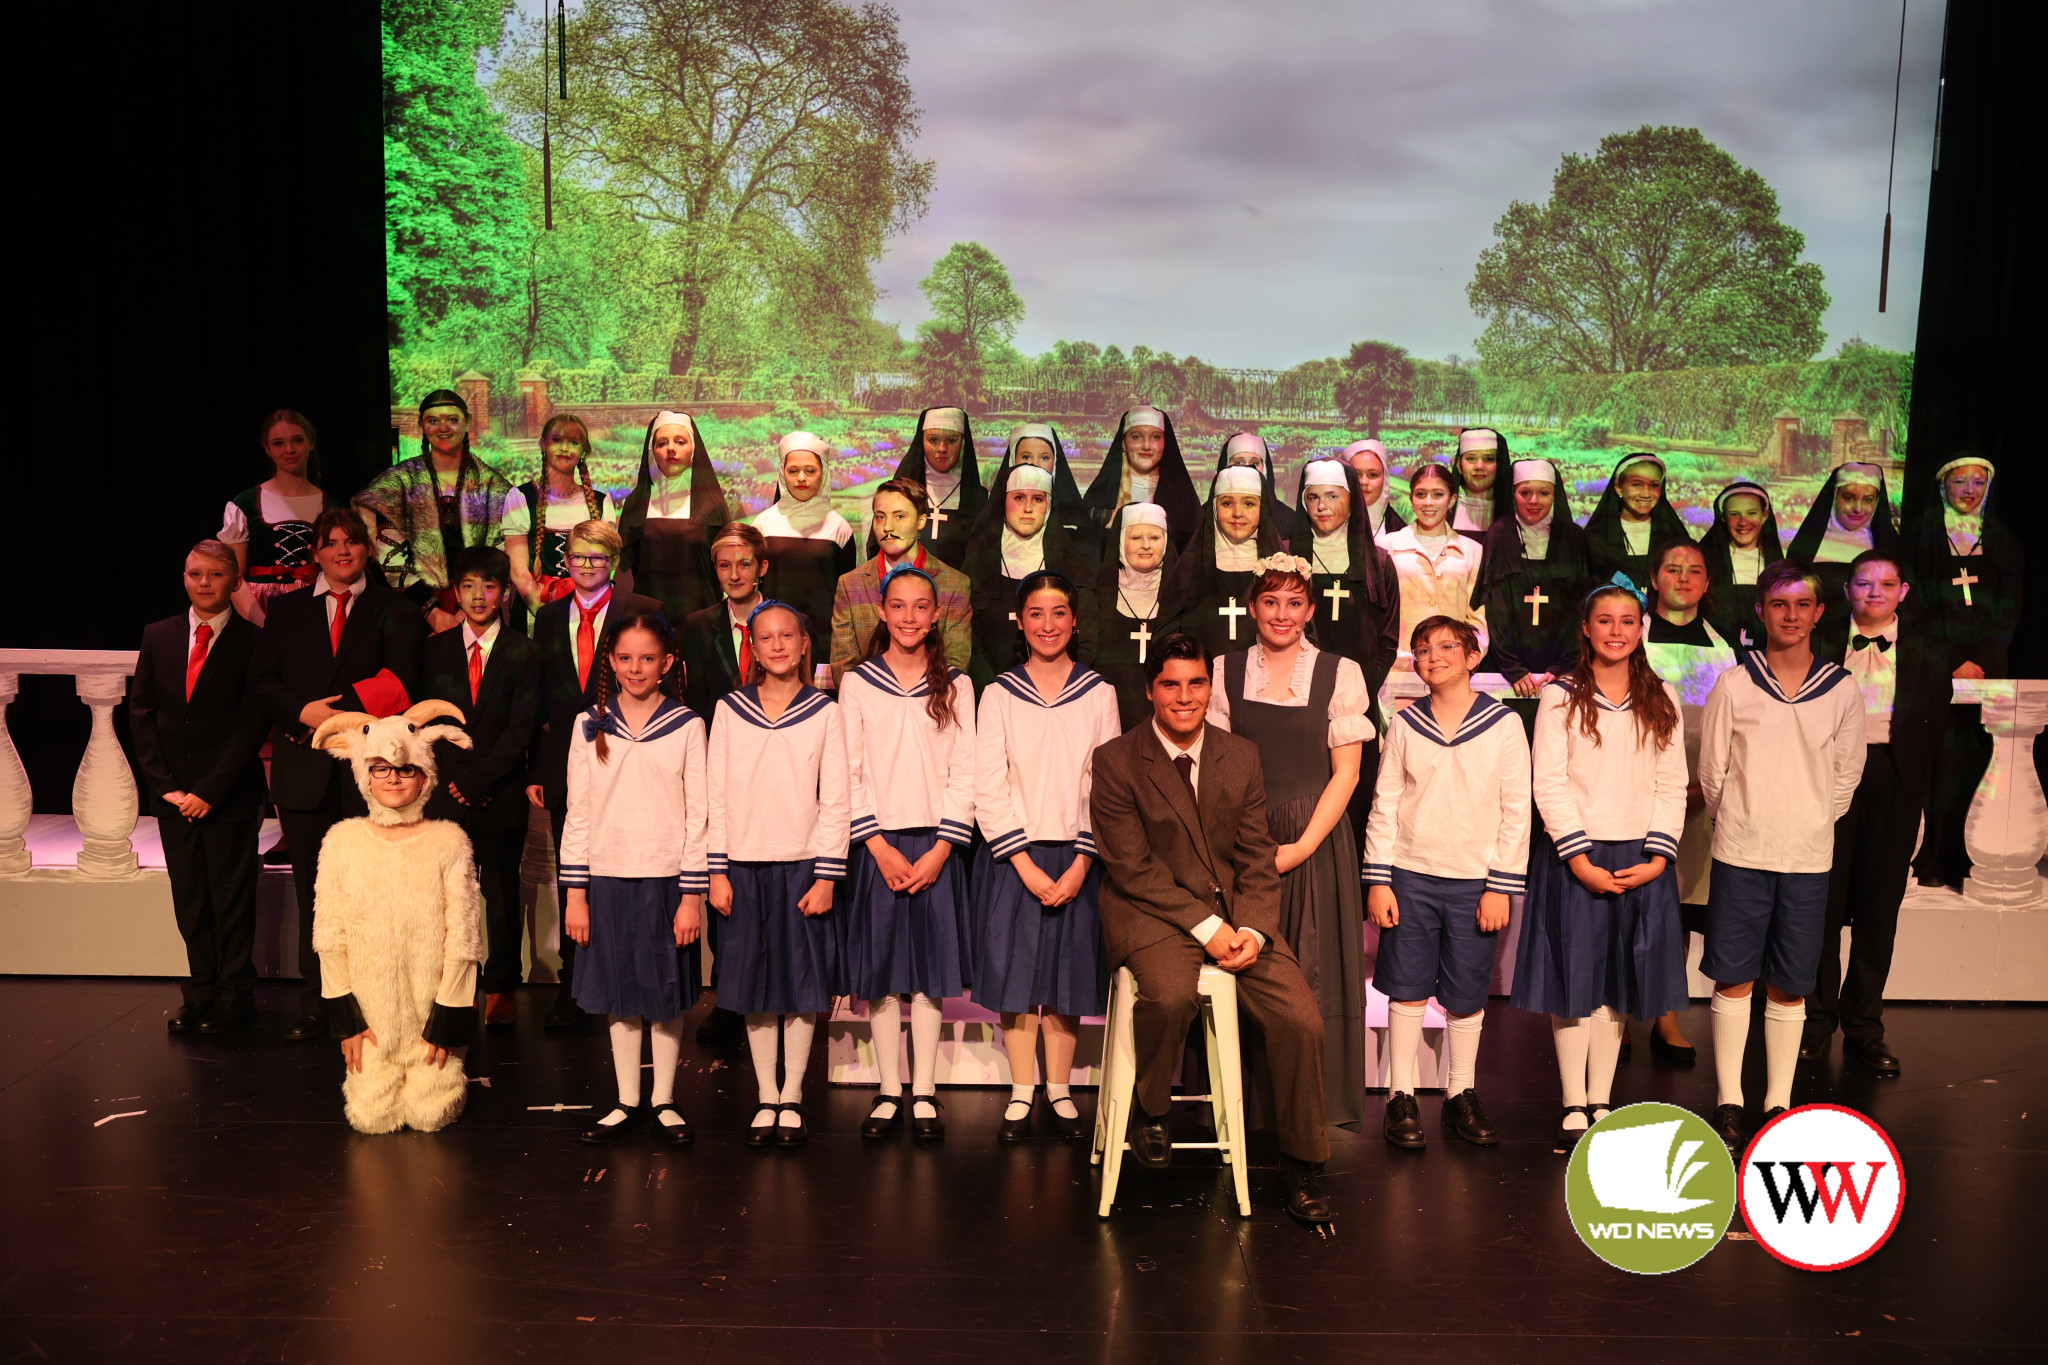 These talented students will have audiences entertained during their production of ‘The Sound of Music’ at Emmanuel College this weekend